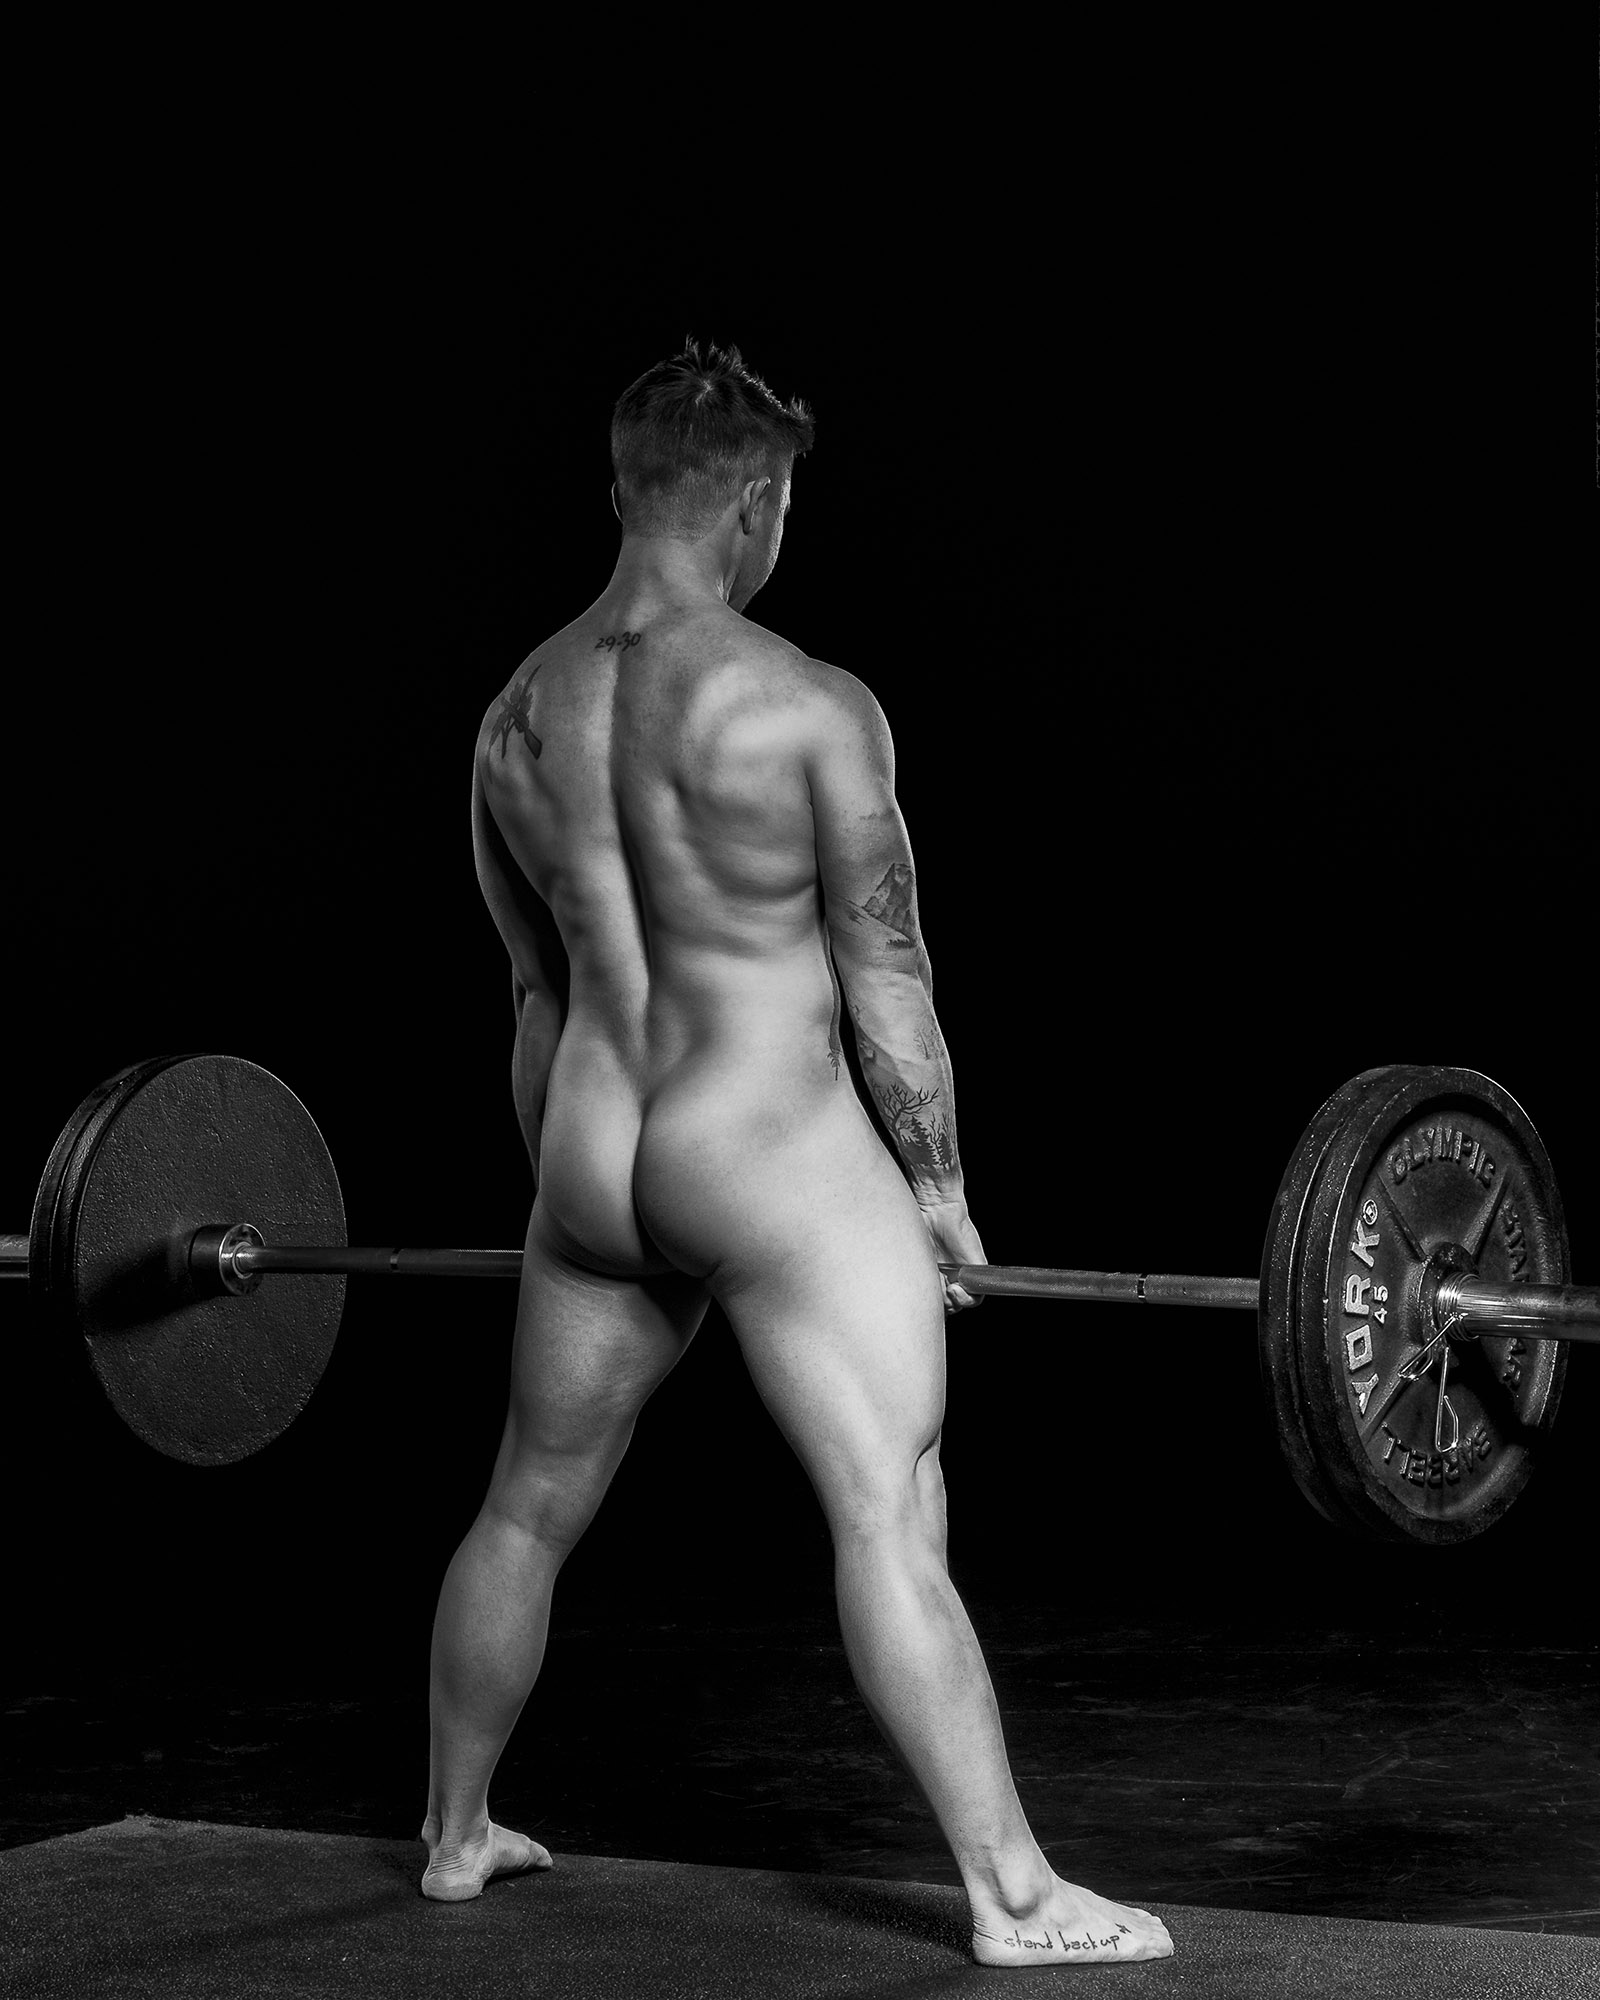 Nude weight lifters